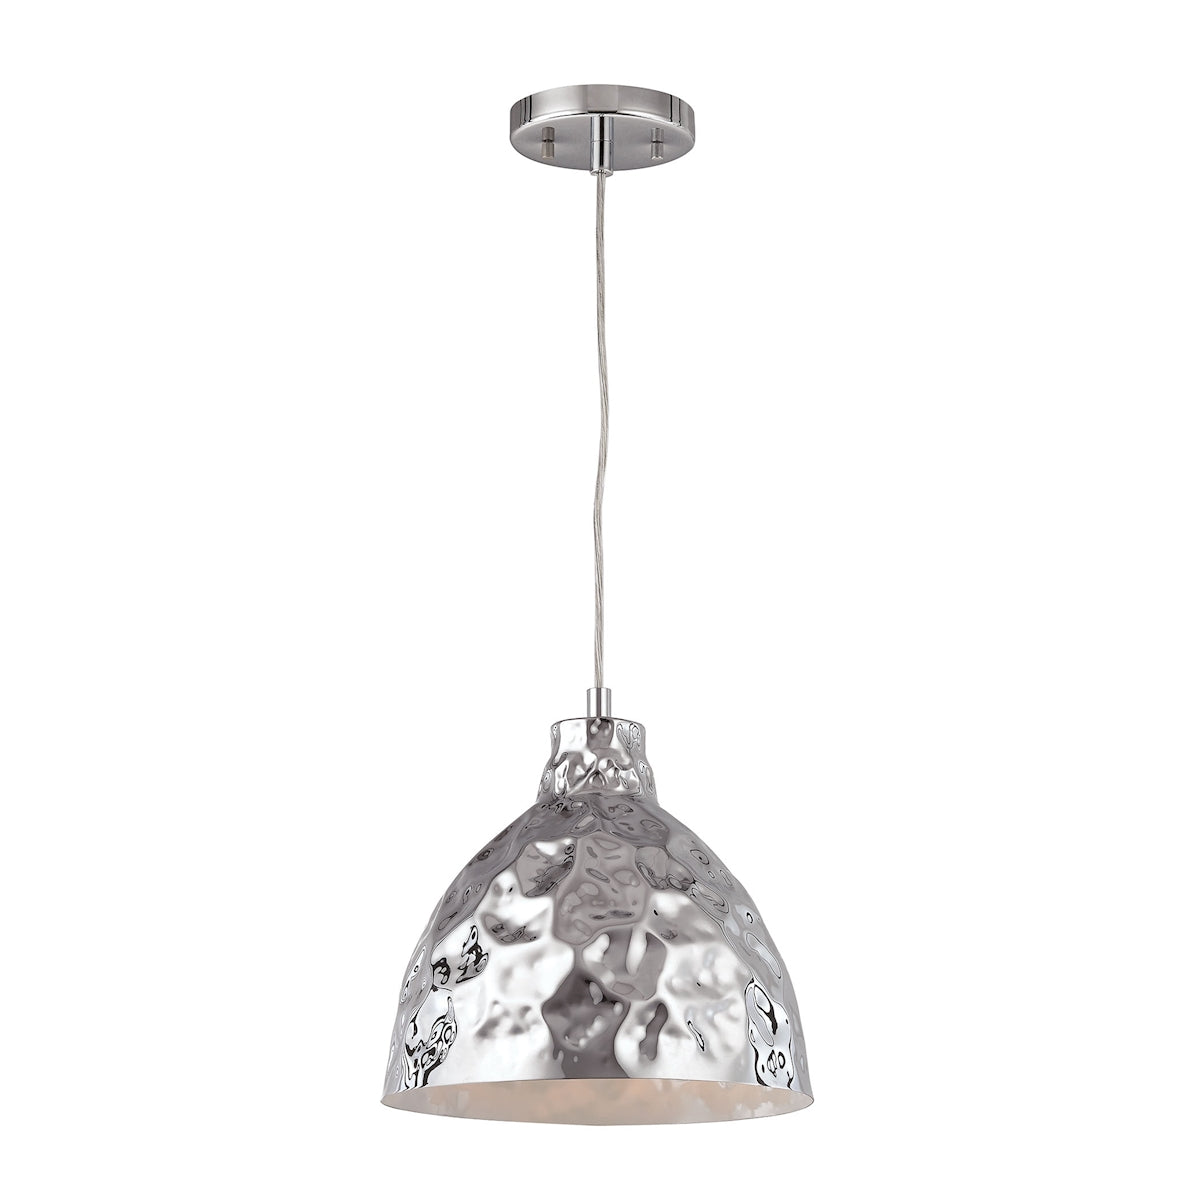 ELK Lighting 46211/1 Hammersmith 1-Light Mini Pendant in Polished Chrome with Hammered Metal Shade